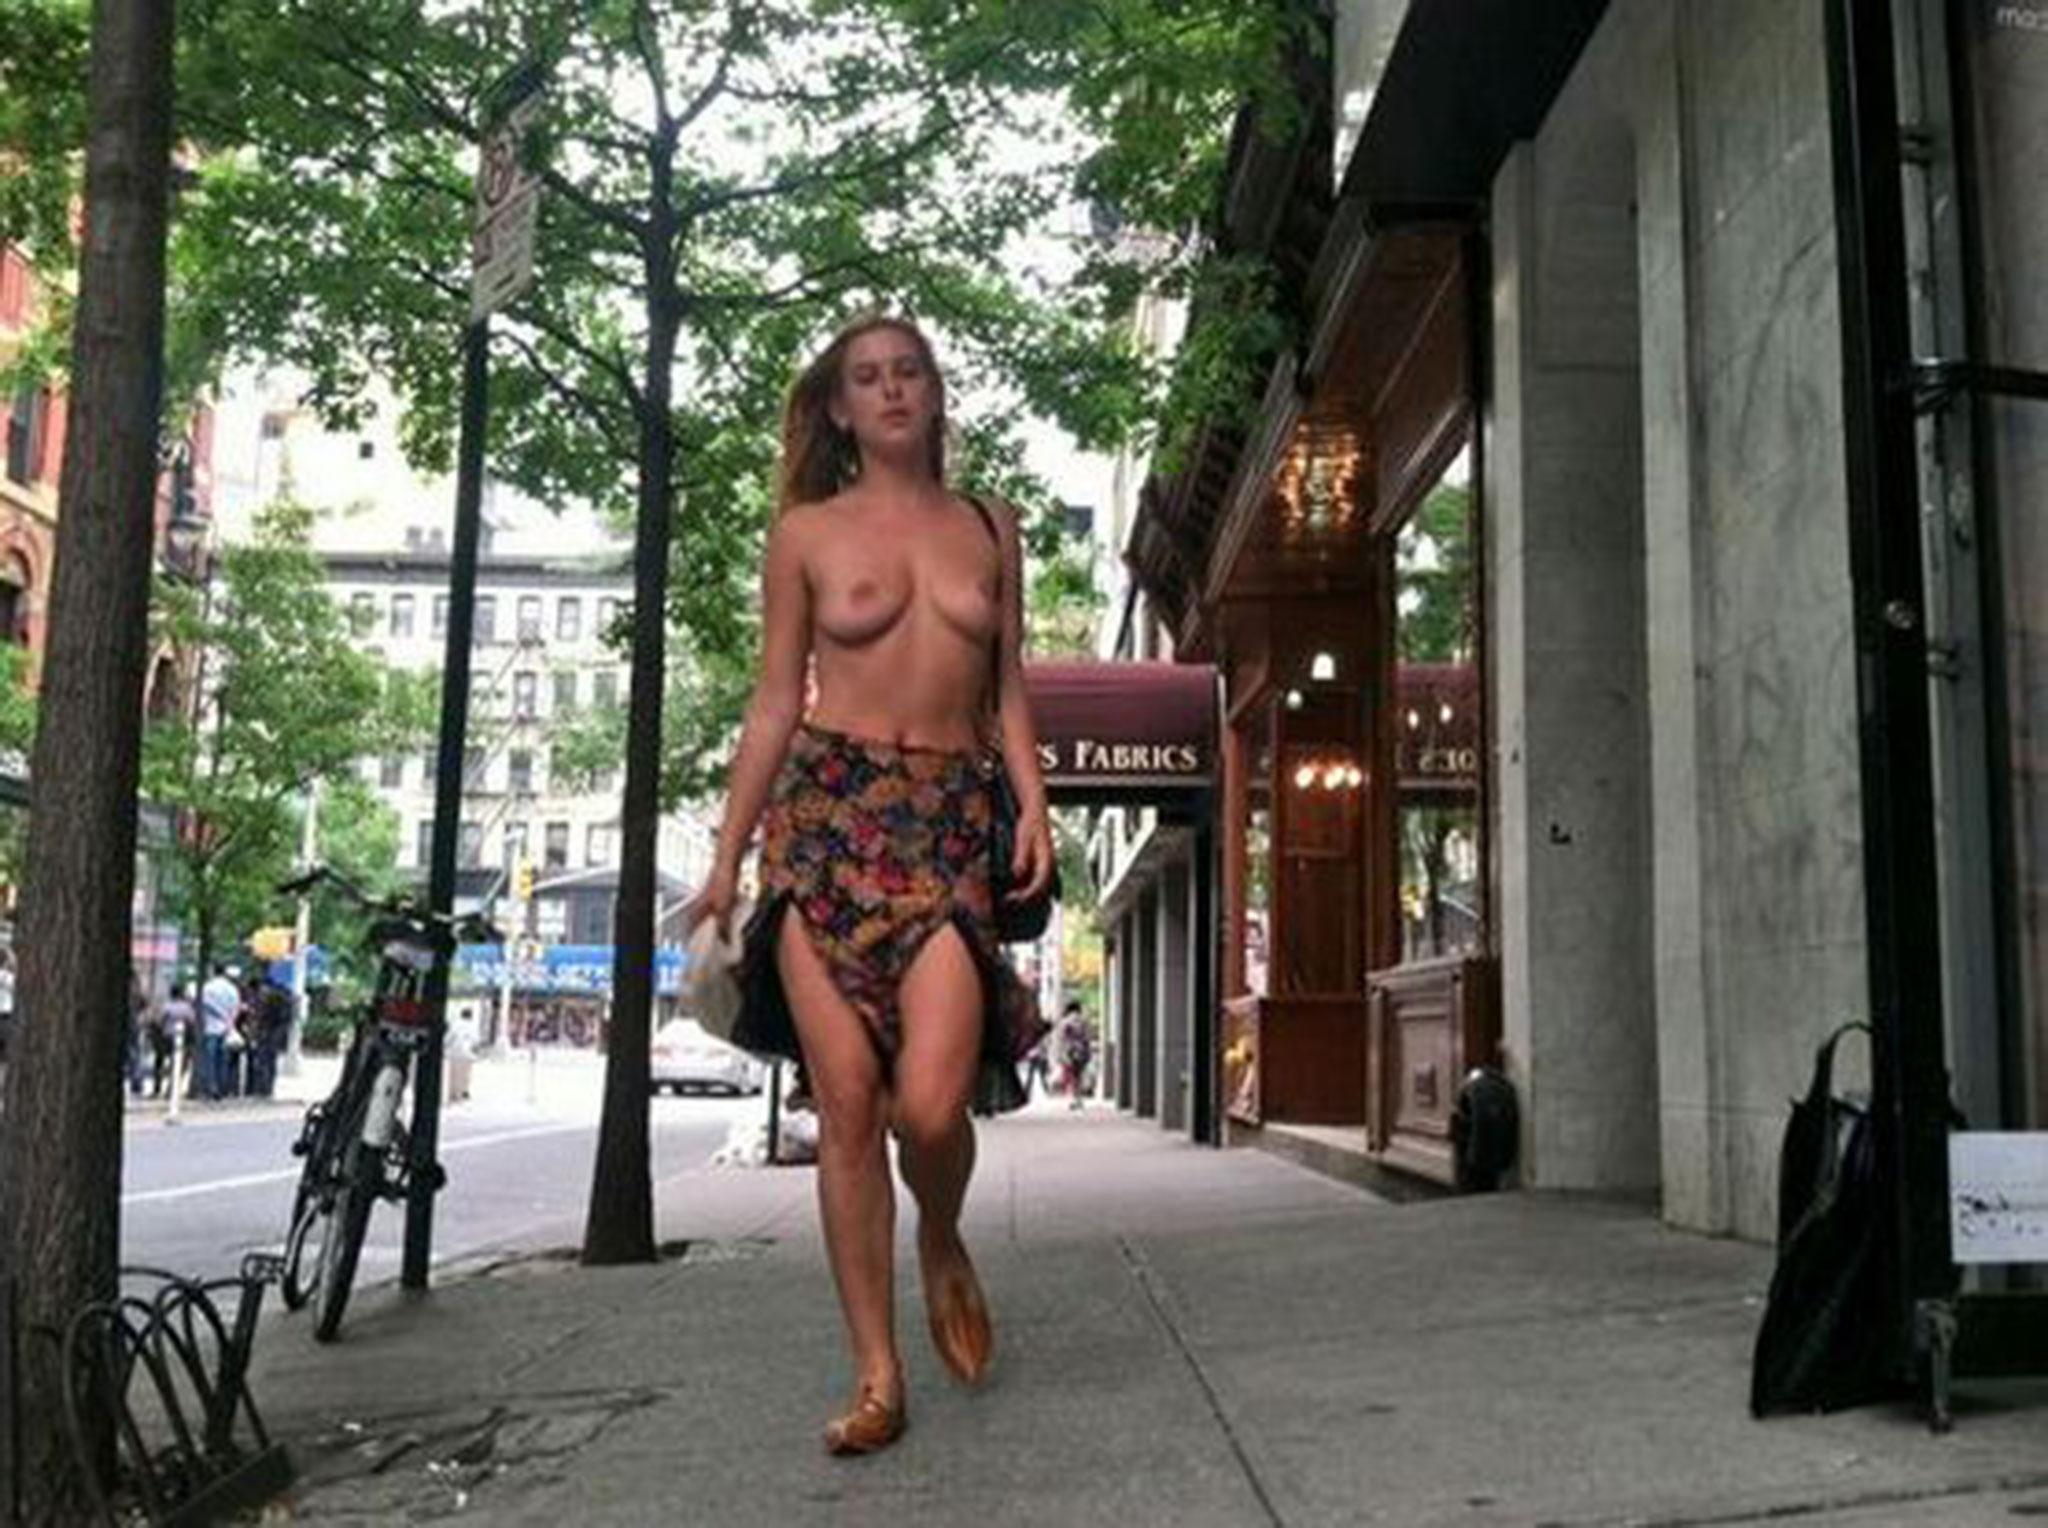 One of the images Scout Willis shared as part of topless protest